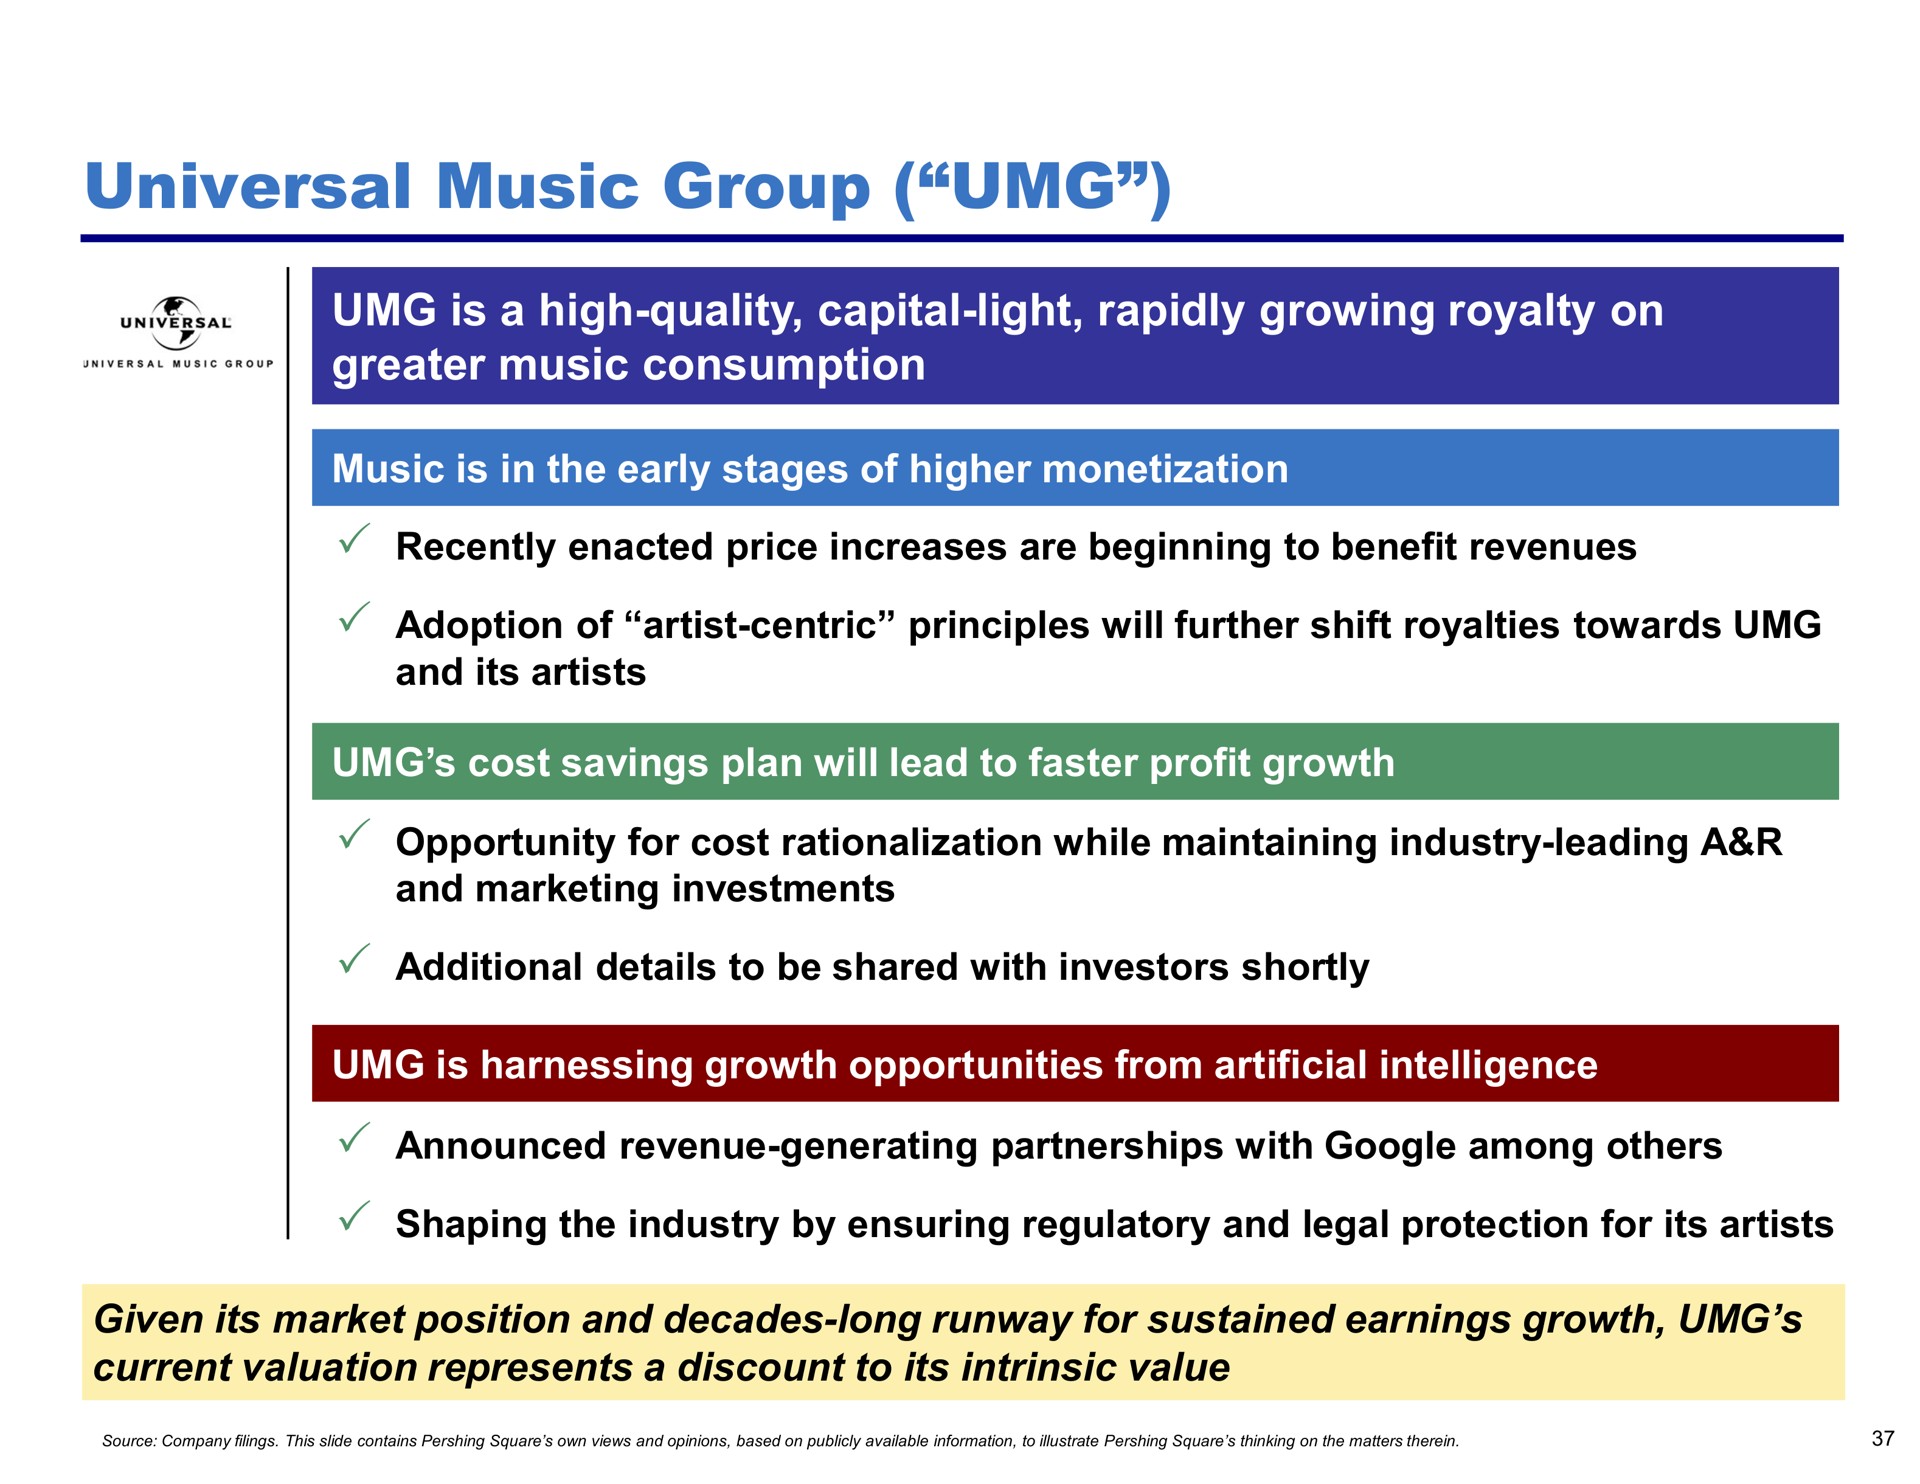 universal music group is a high quality capital light rapidly growing royalty on greater music consumption | Pershing Square